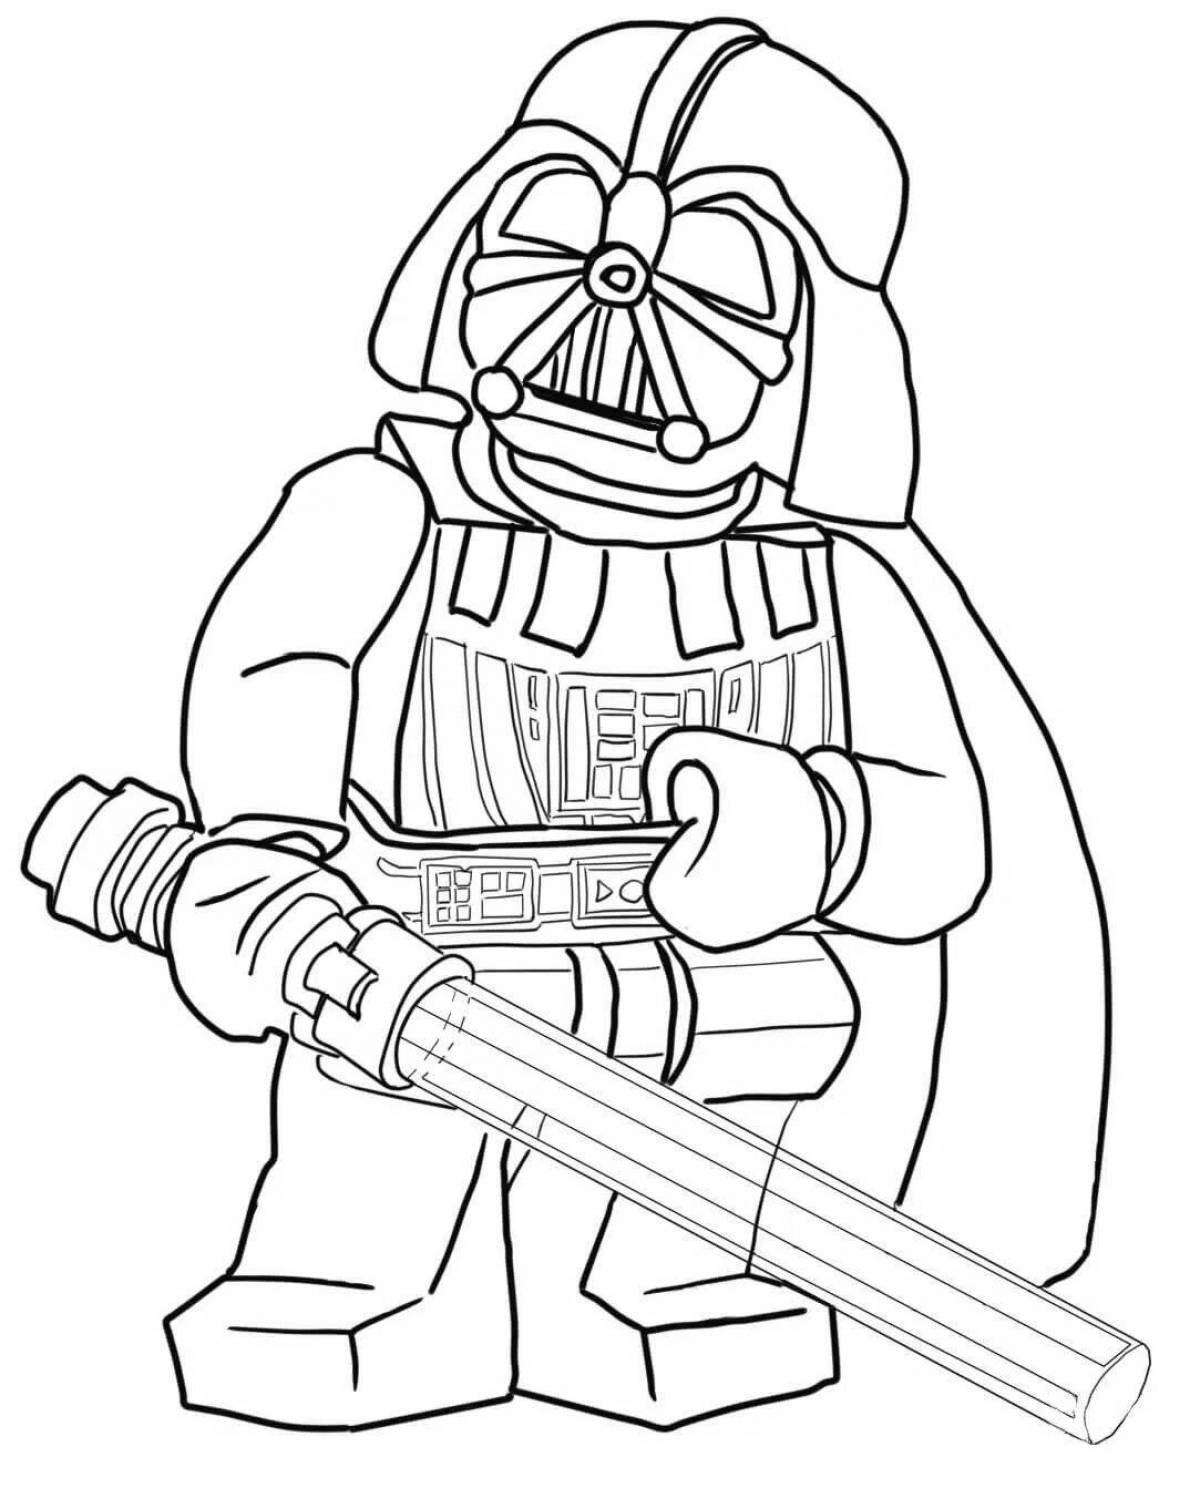 A wonderful coloring book for boys star wars